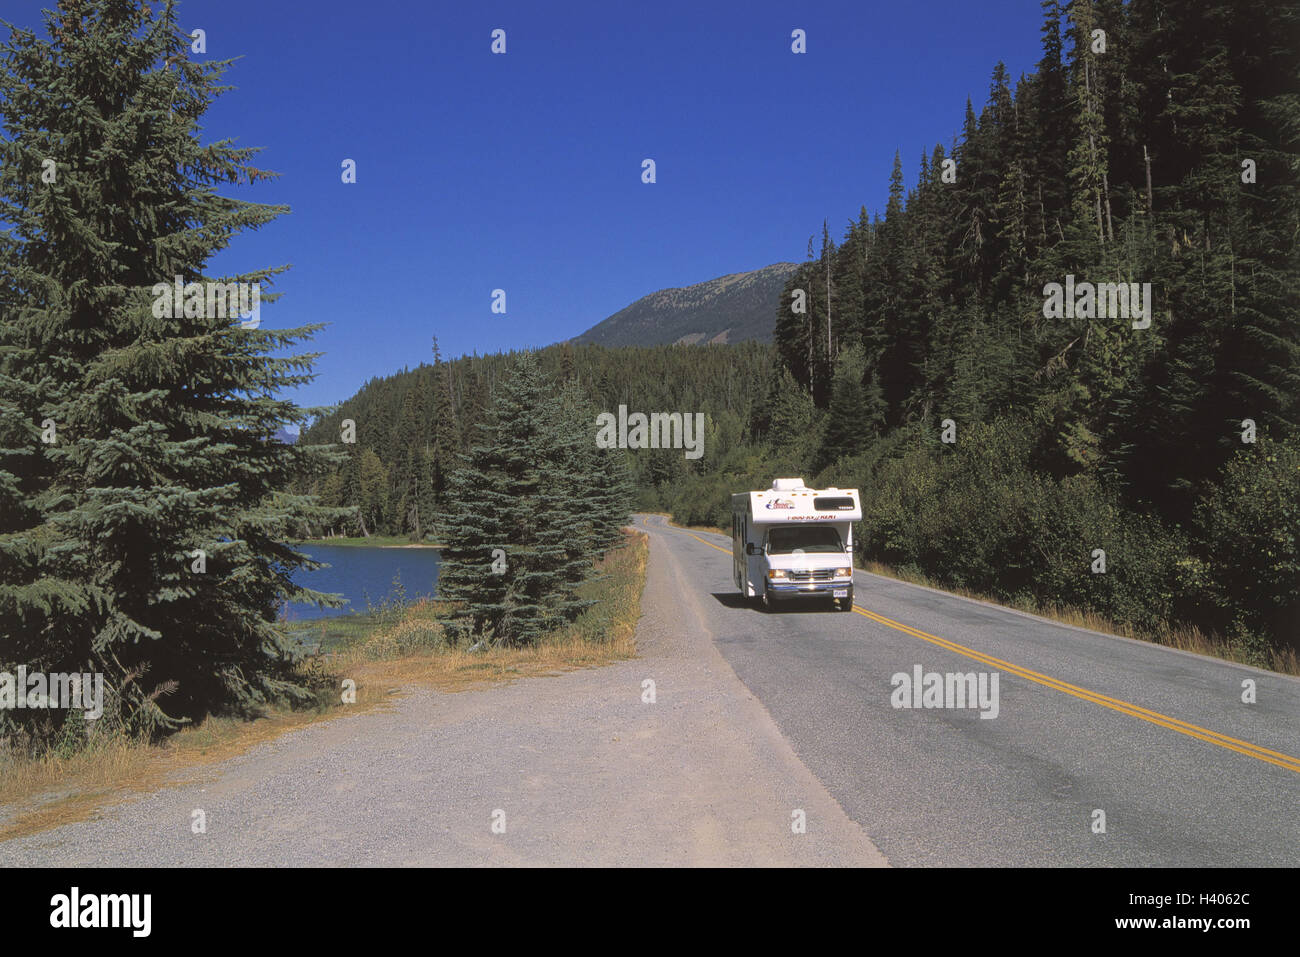 Canada, British Columbia, brine Duffy, close Pemberton, highway 99, camper  west Canada, west coast, the west, mountain landscape, mountains, lake,  mountain lake, street, country road, mountain road, traffic facility,  leisure time, vacation,